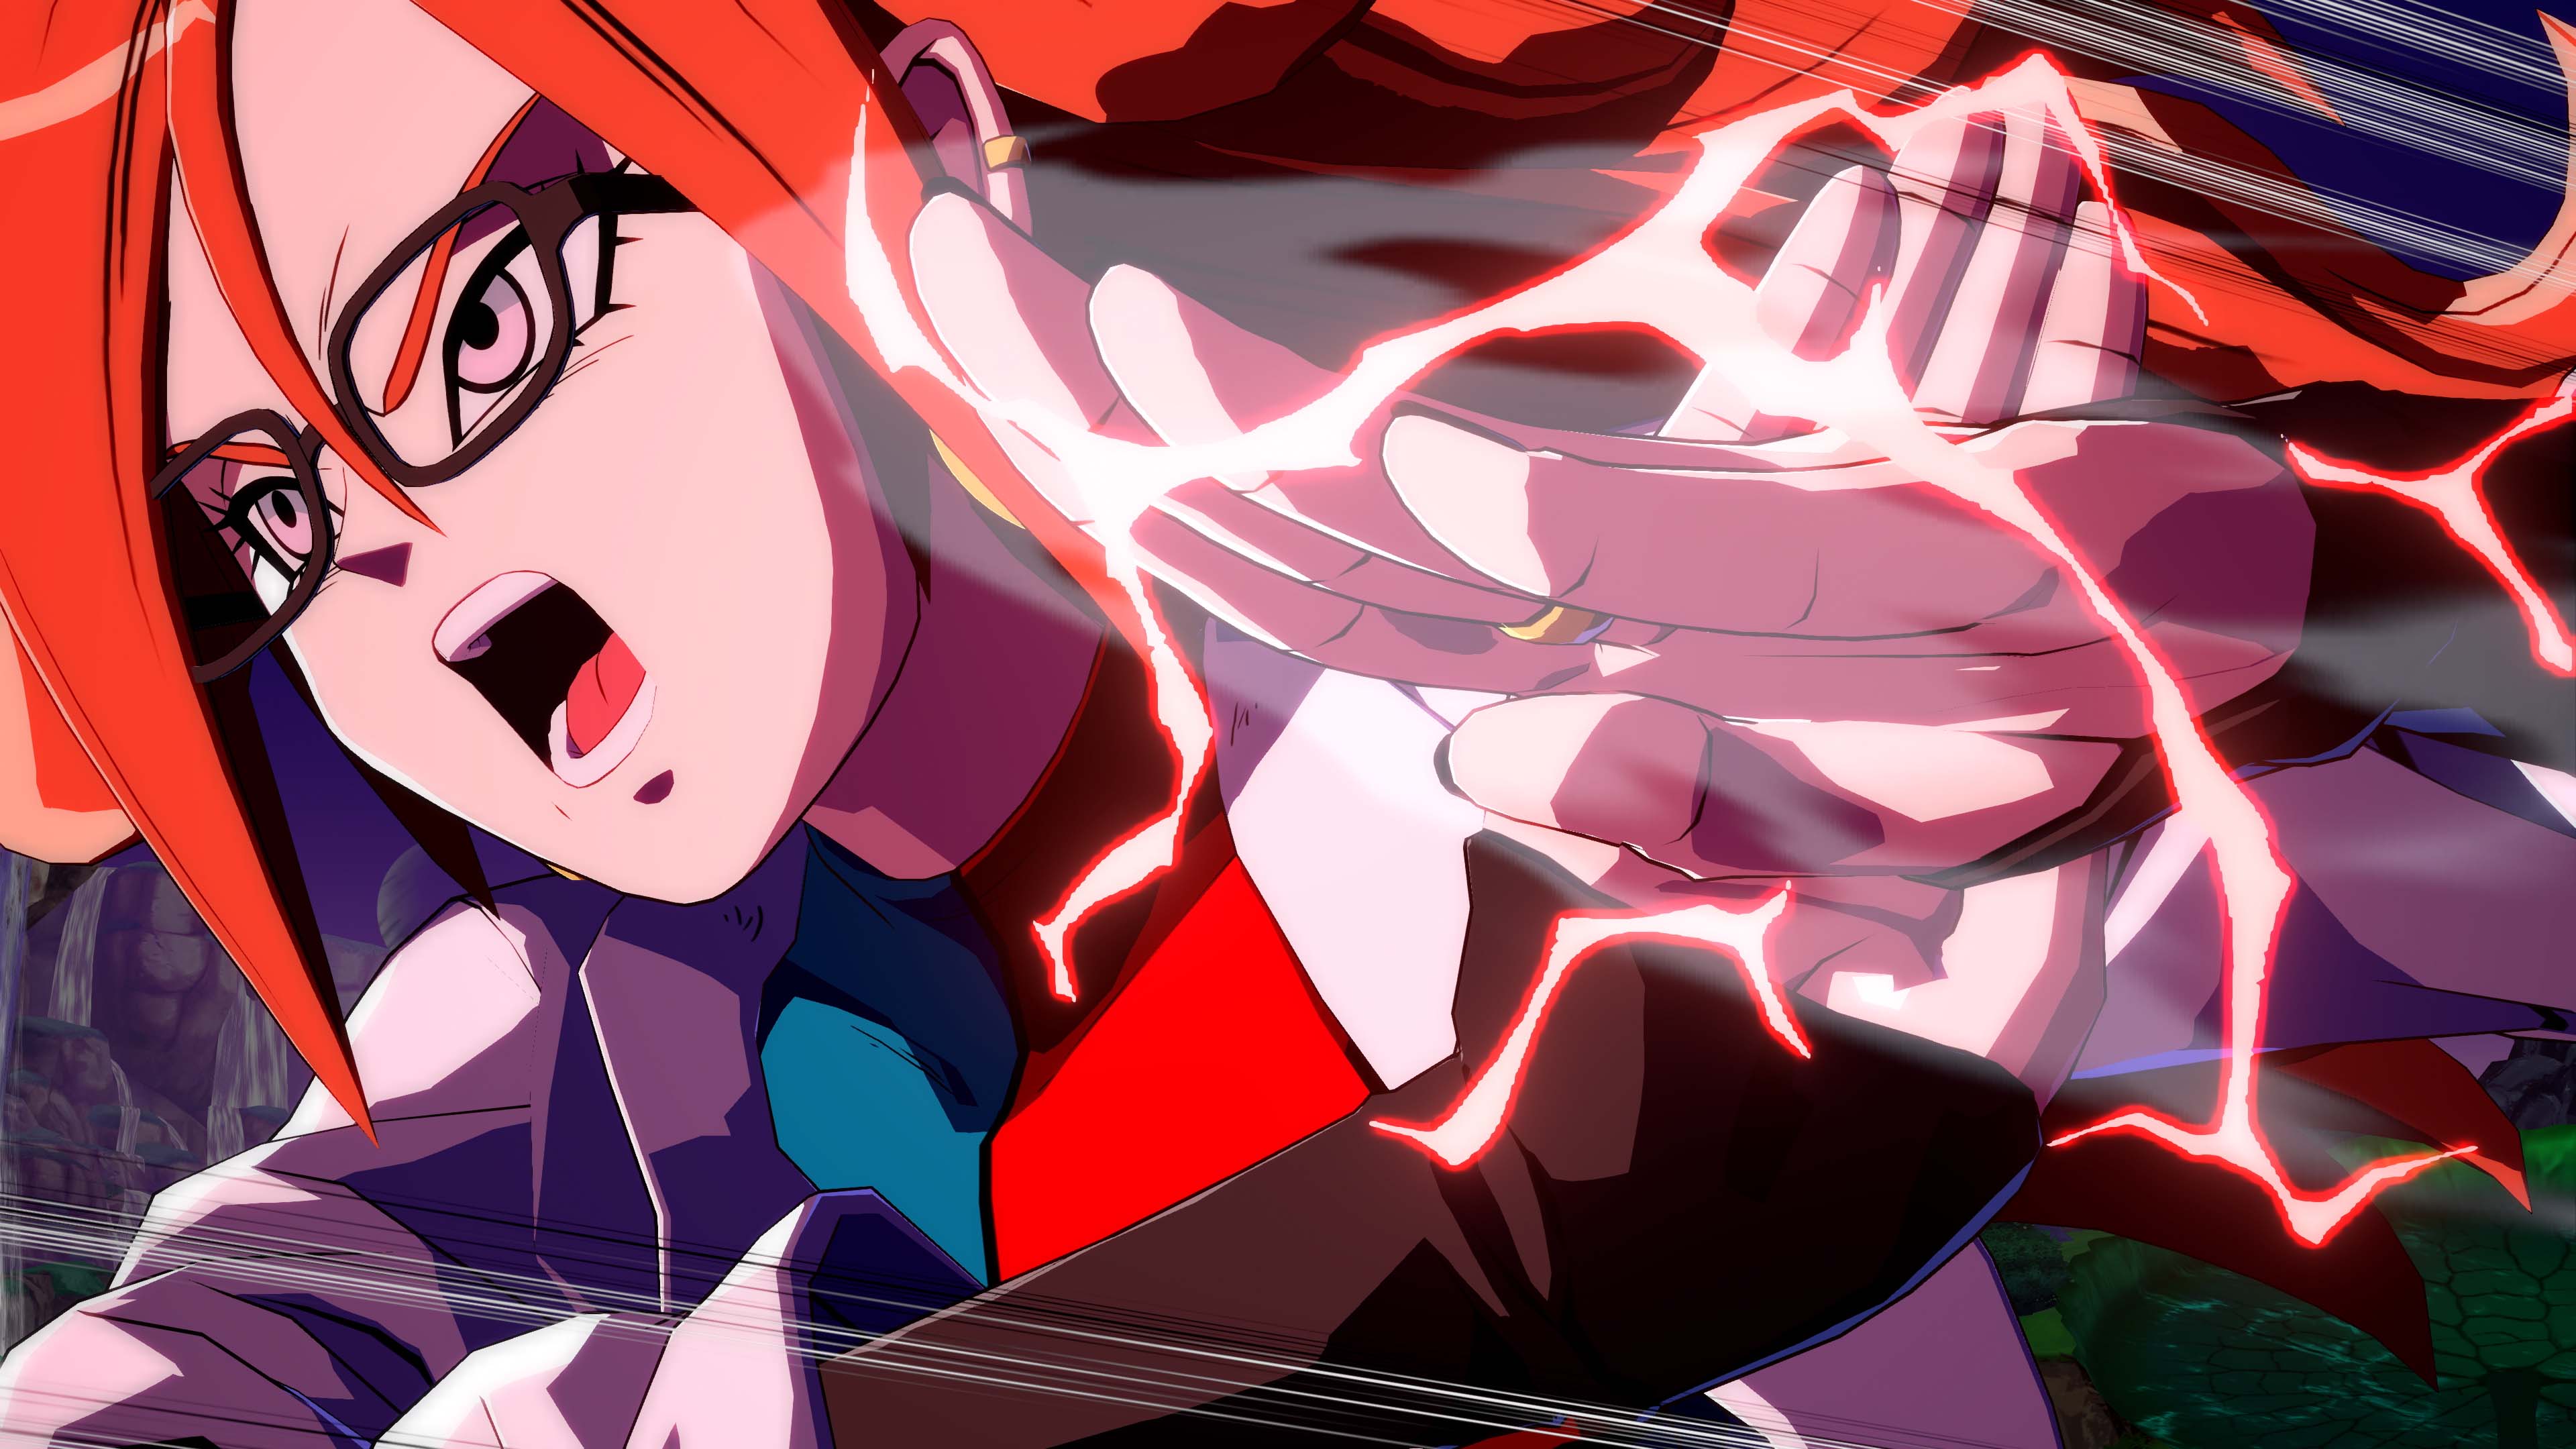 Dragon Ball FighterZ: How To Unlock Android 21, SSGSS Vegeta, And